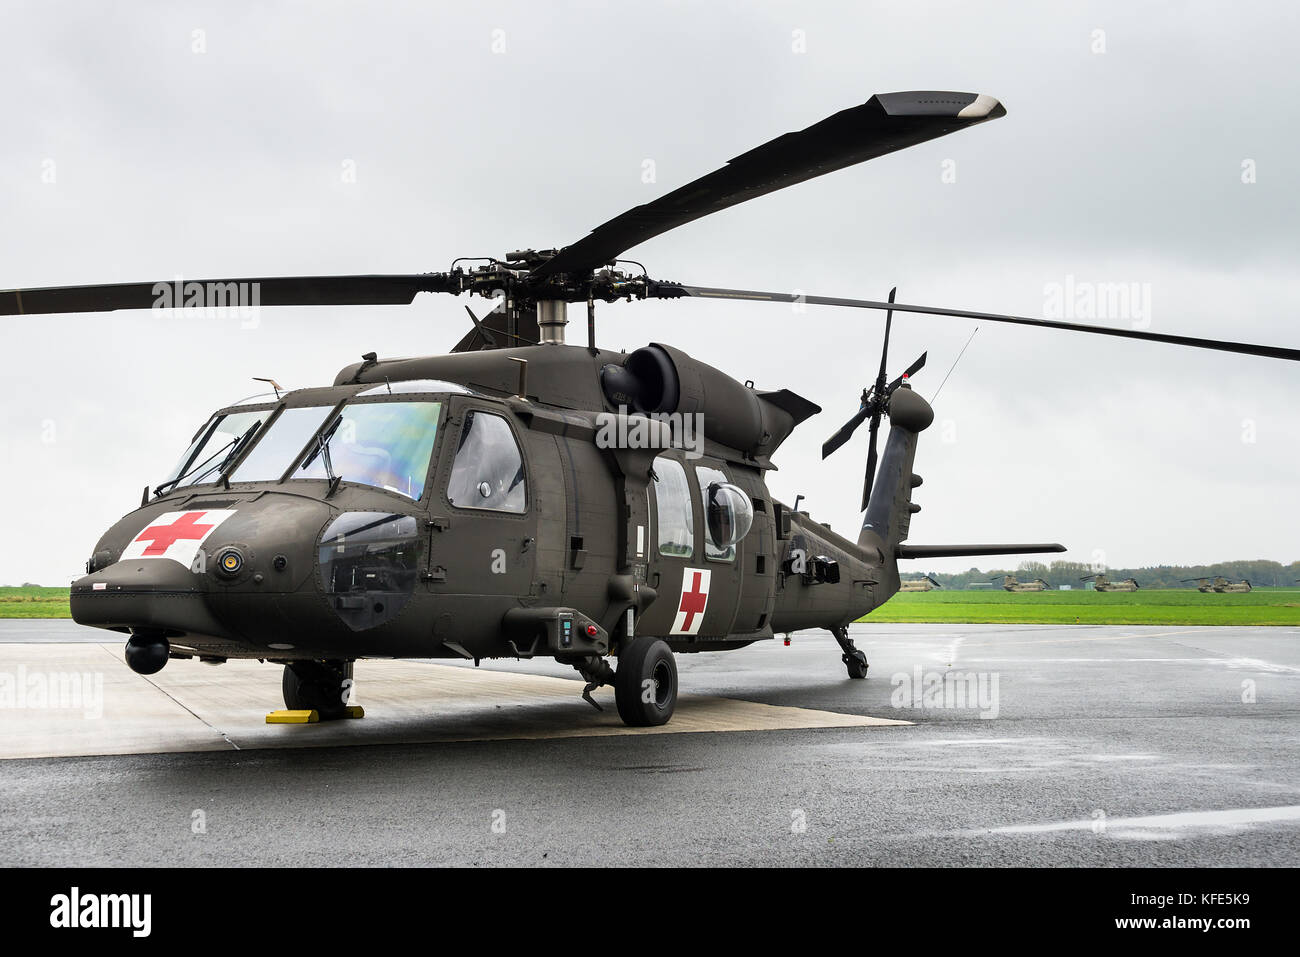 A Sikorsky UH-60 Black Hawk Medevac helicopter of the US Army at the Chièvres Air Base in Belgium. Medevac teams provide emergency care to U.S. forces. Stock Photo